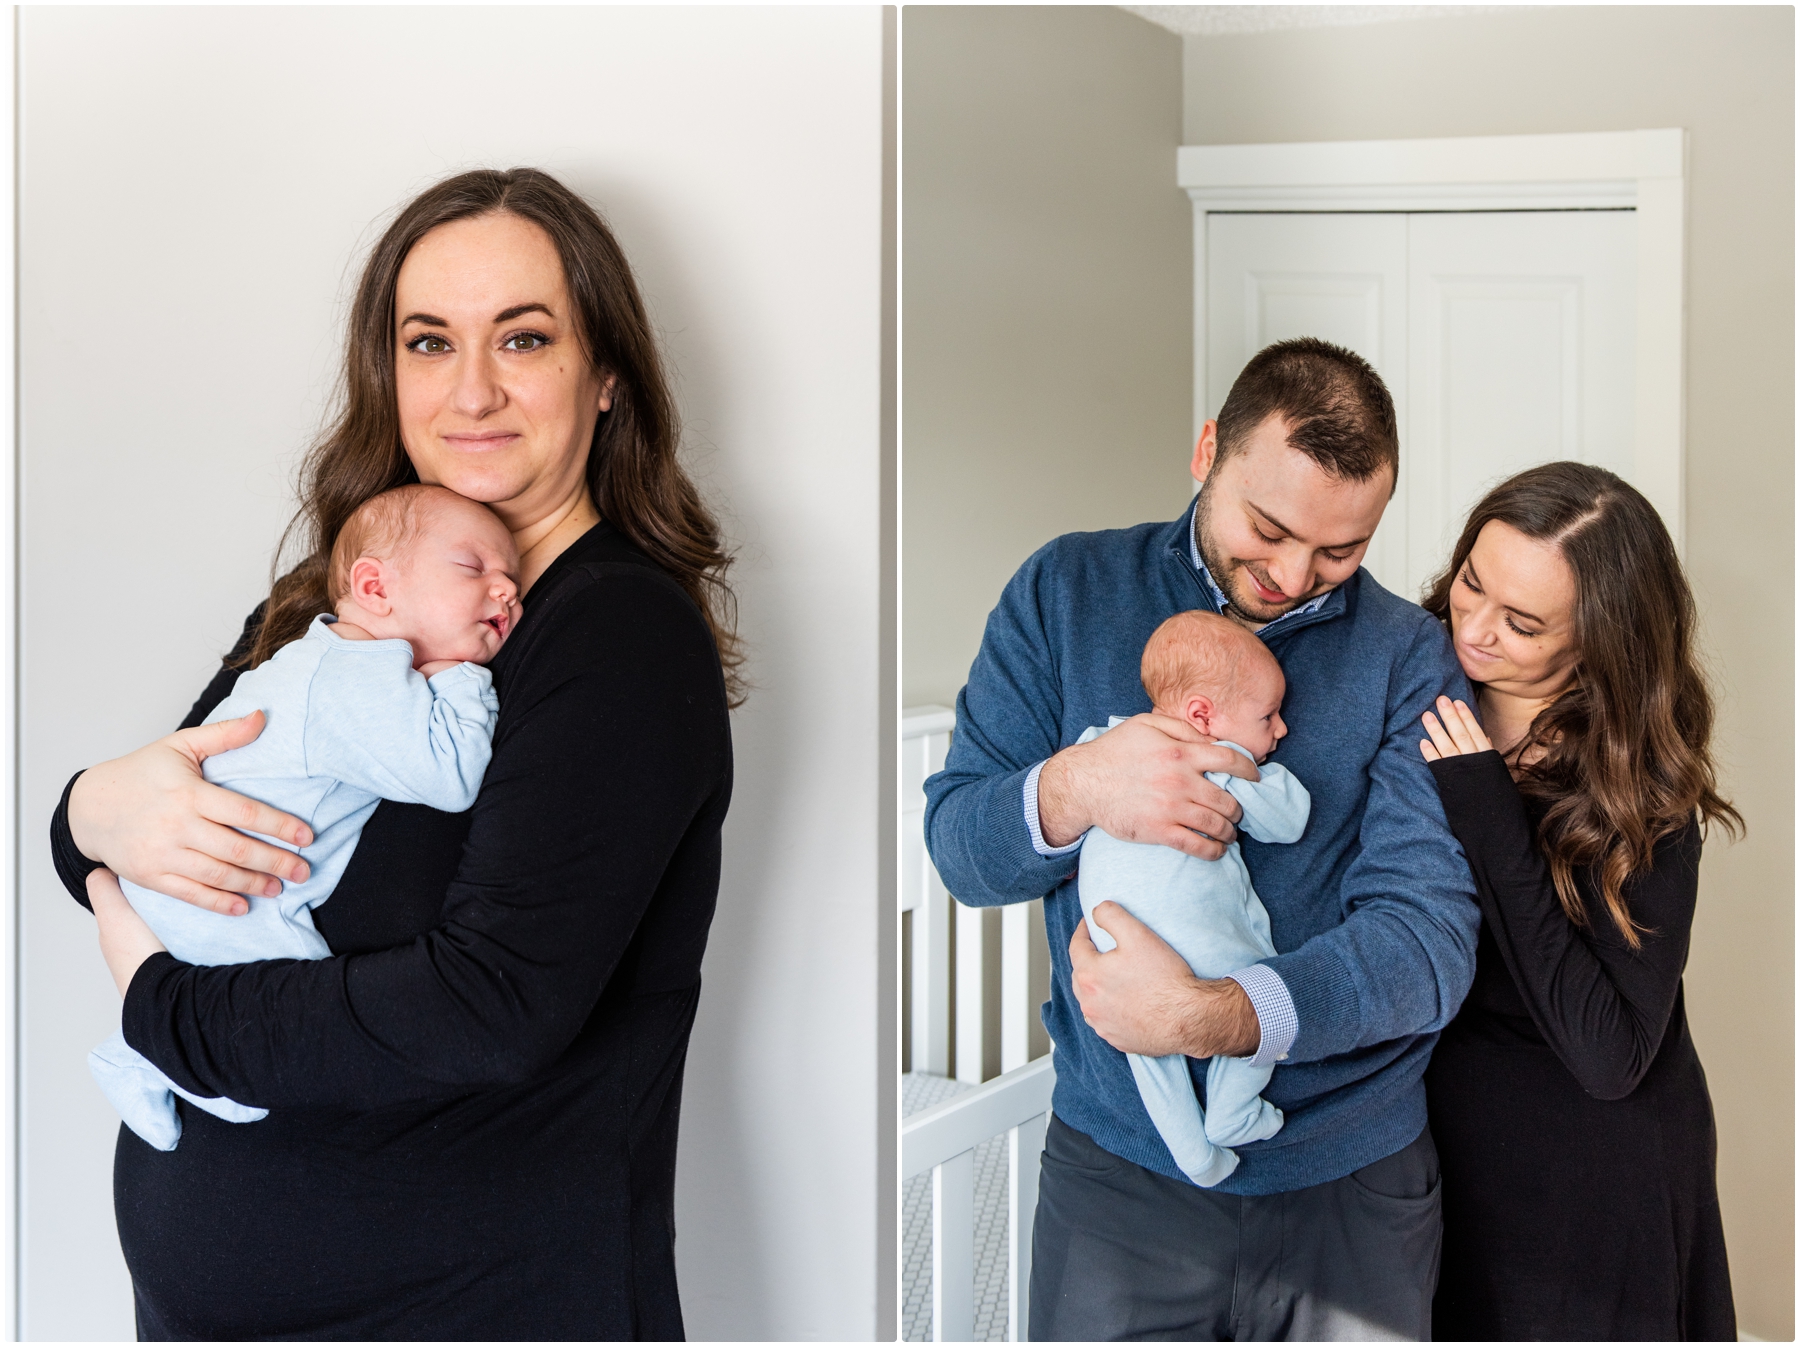 Snugly Calgary At Home Newborn Photography Session